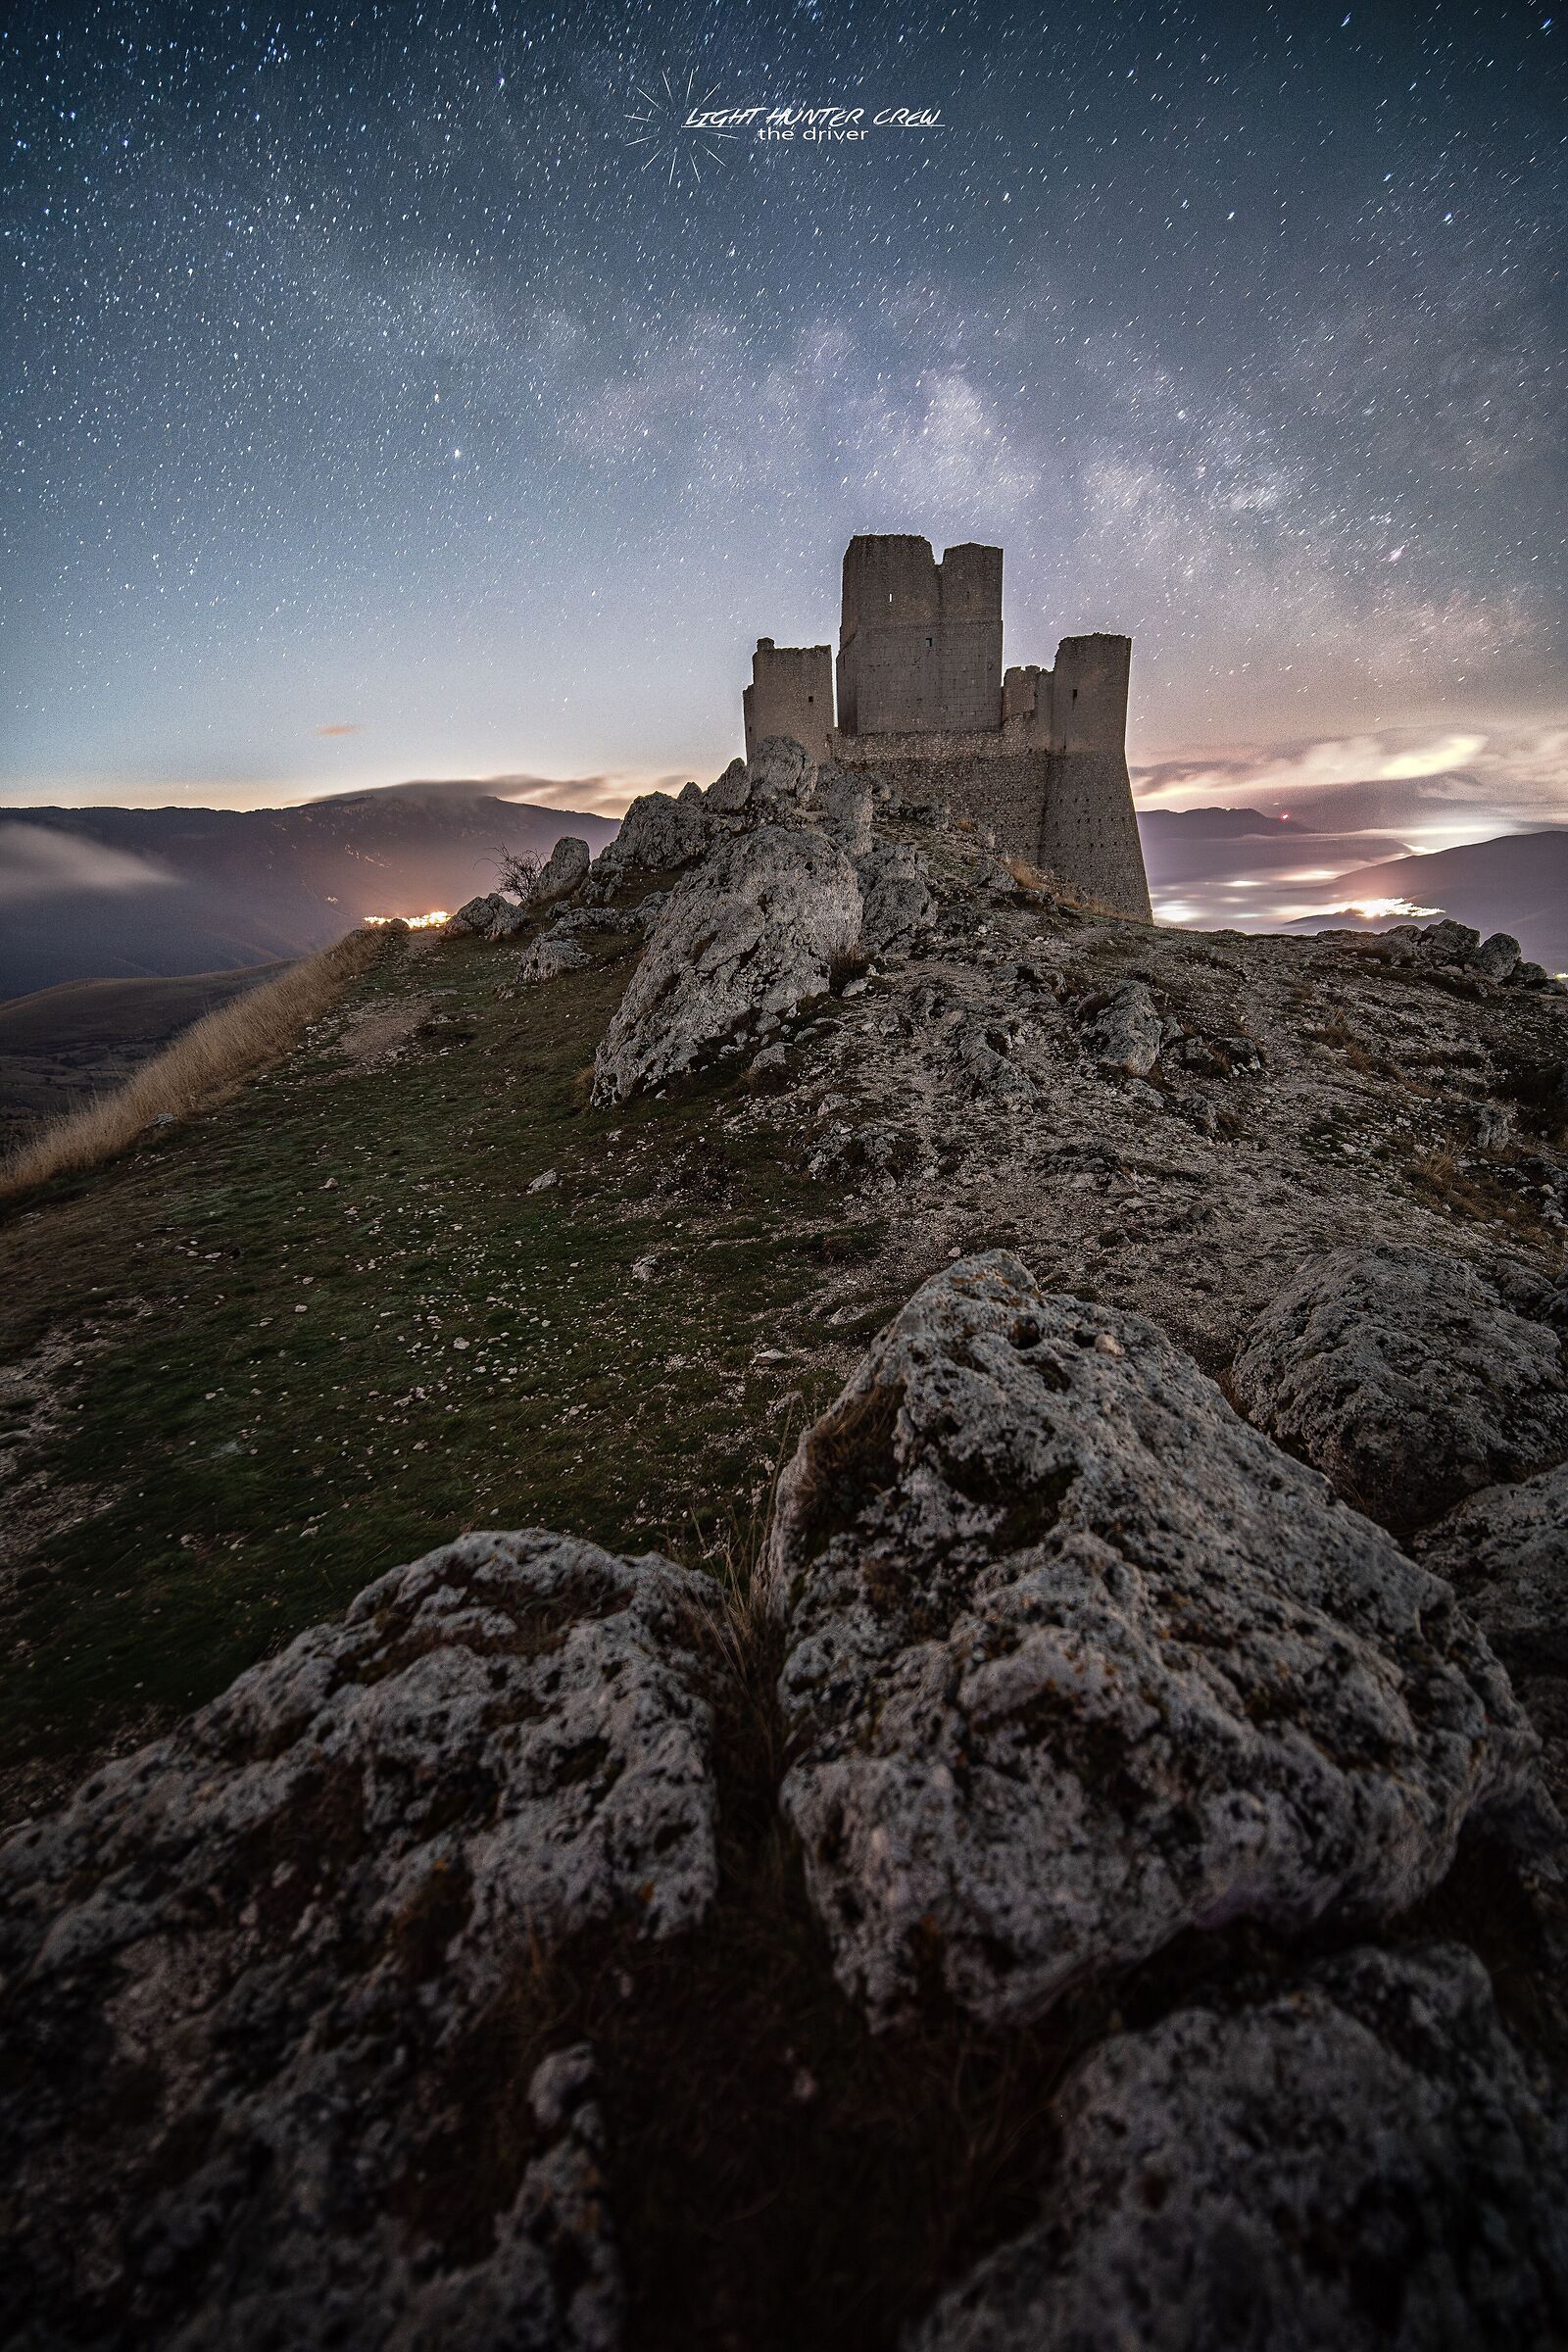 The Rocca under a starry sky......